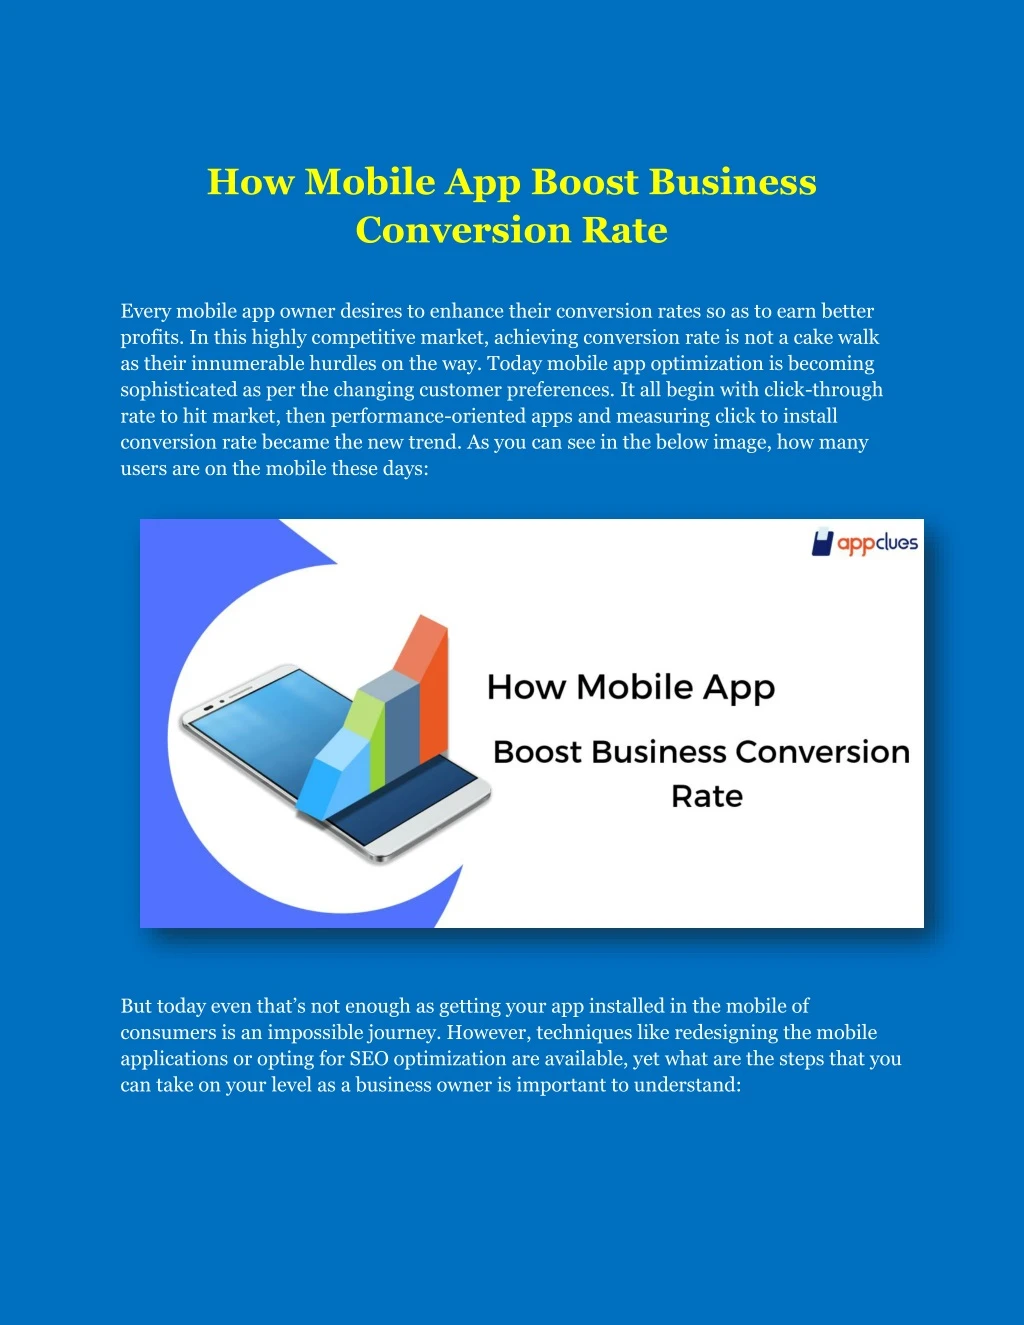 how mobile app boost business conversion rate